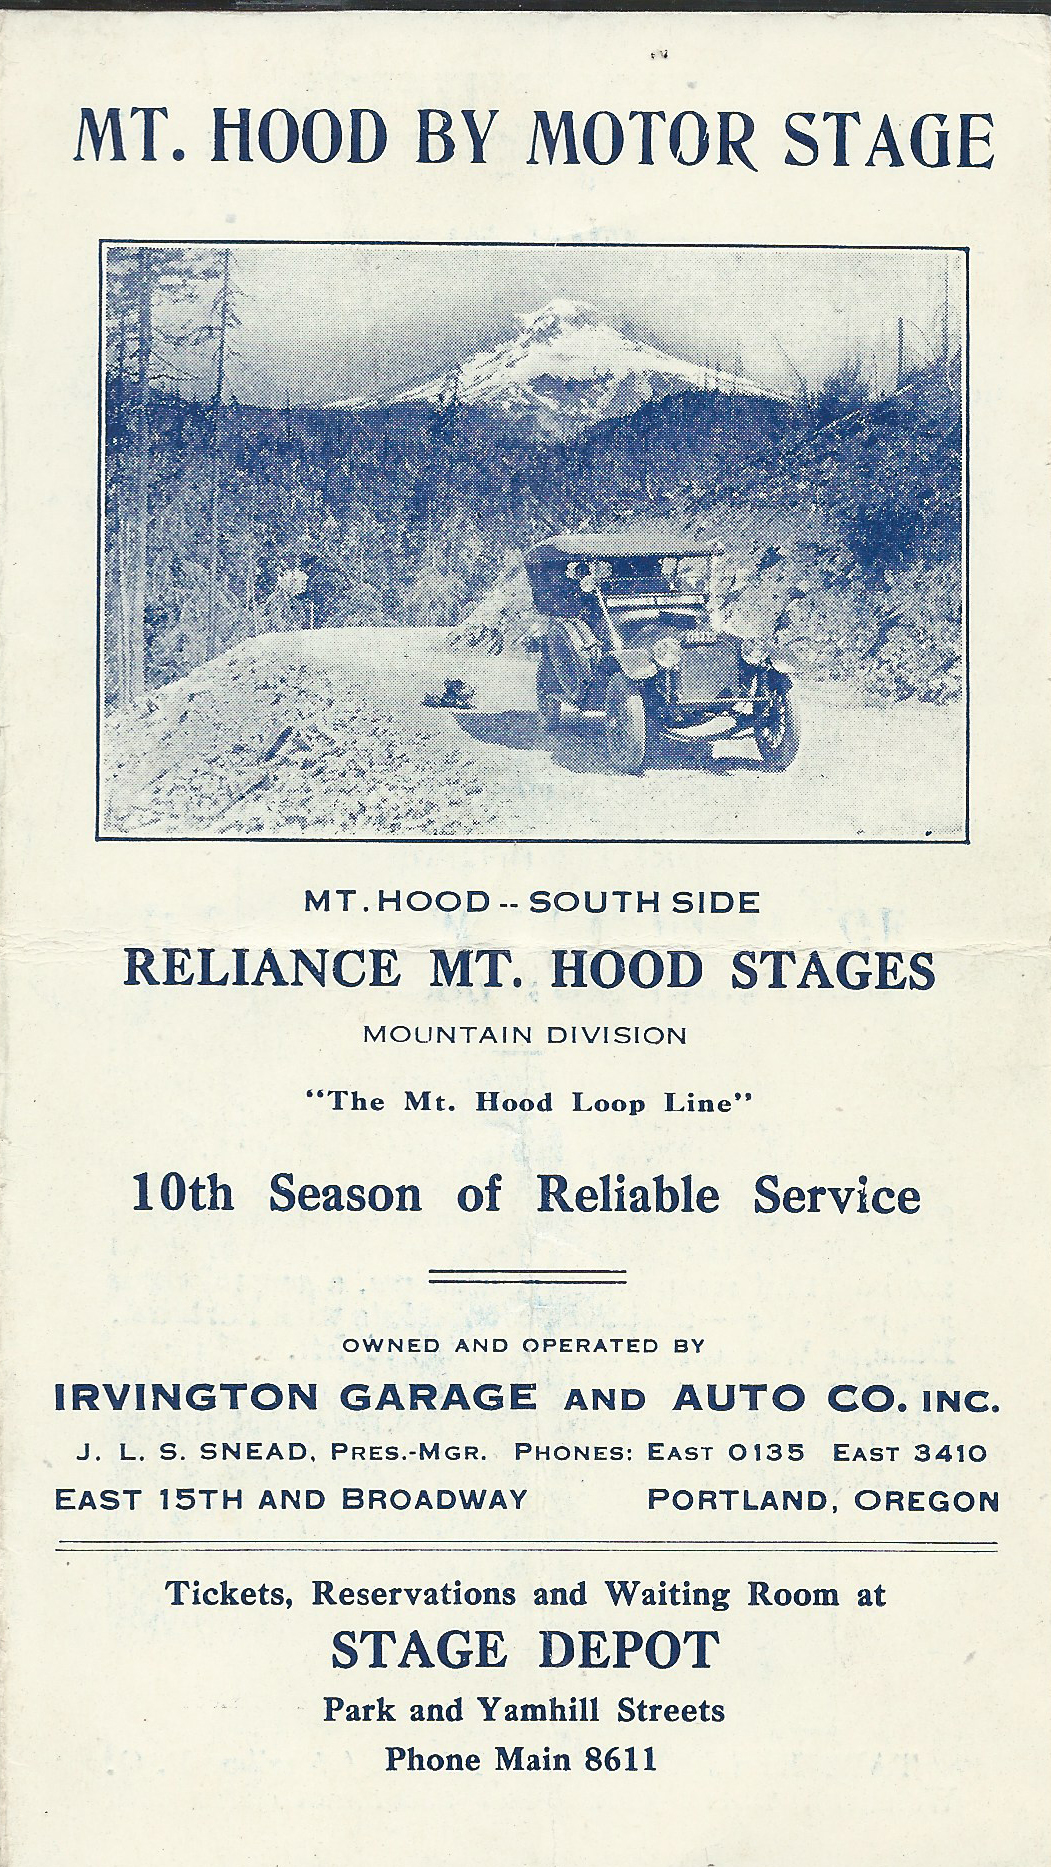 Reliance Mt Hood Stages Advert